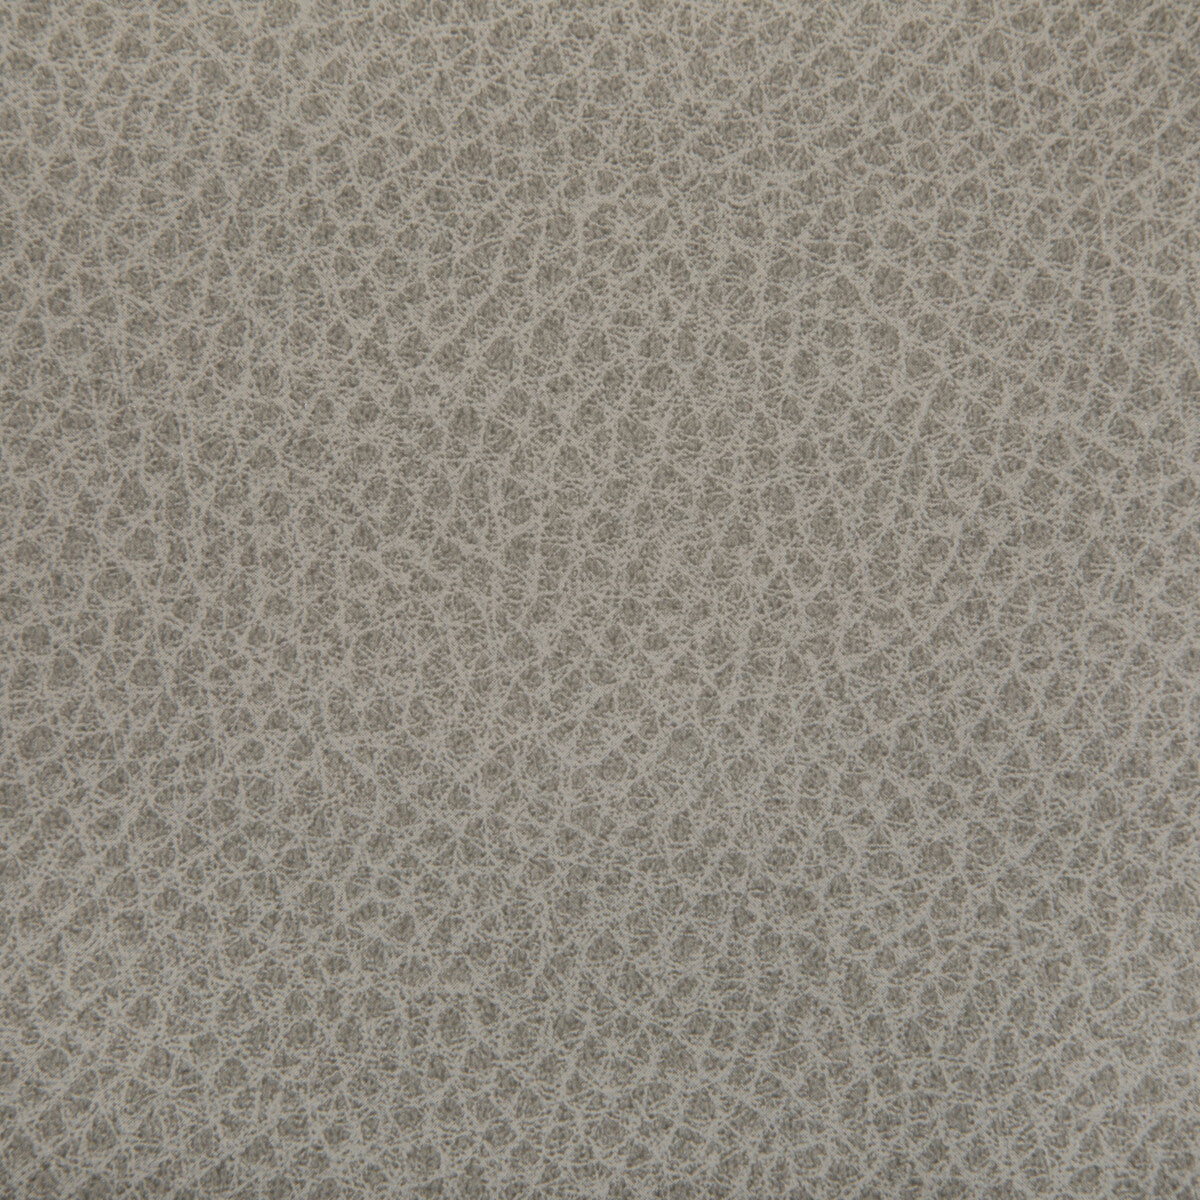 Woolf fabric in porcini color - pattern WOOLF.11.0 - by Kravet Contract